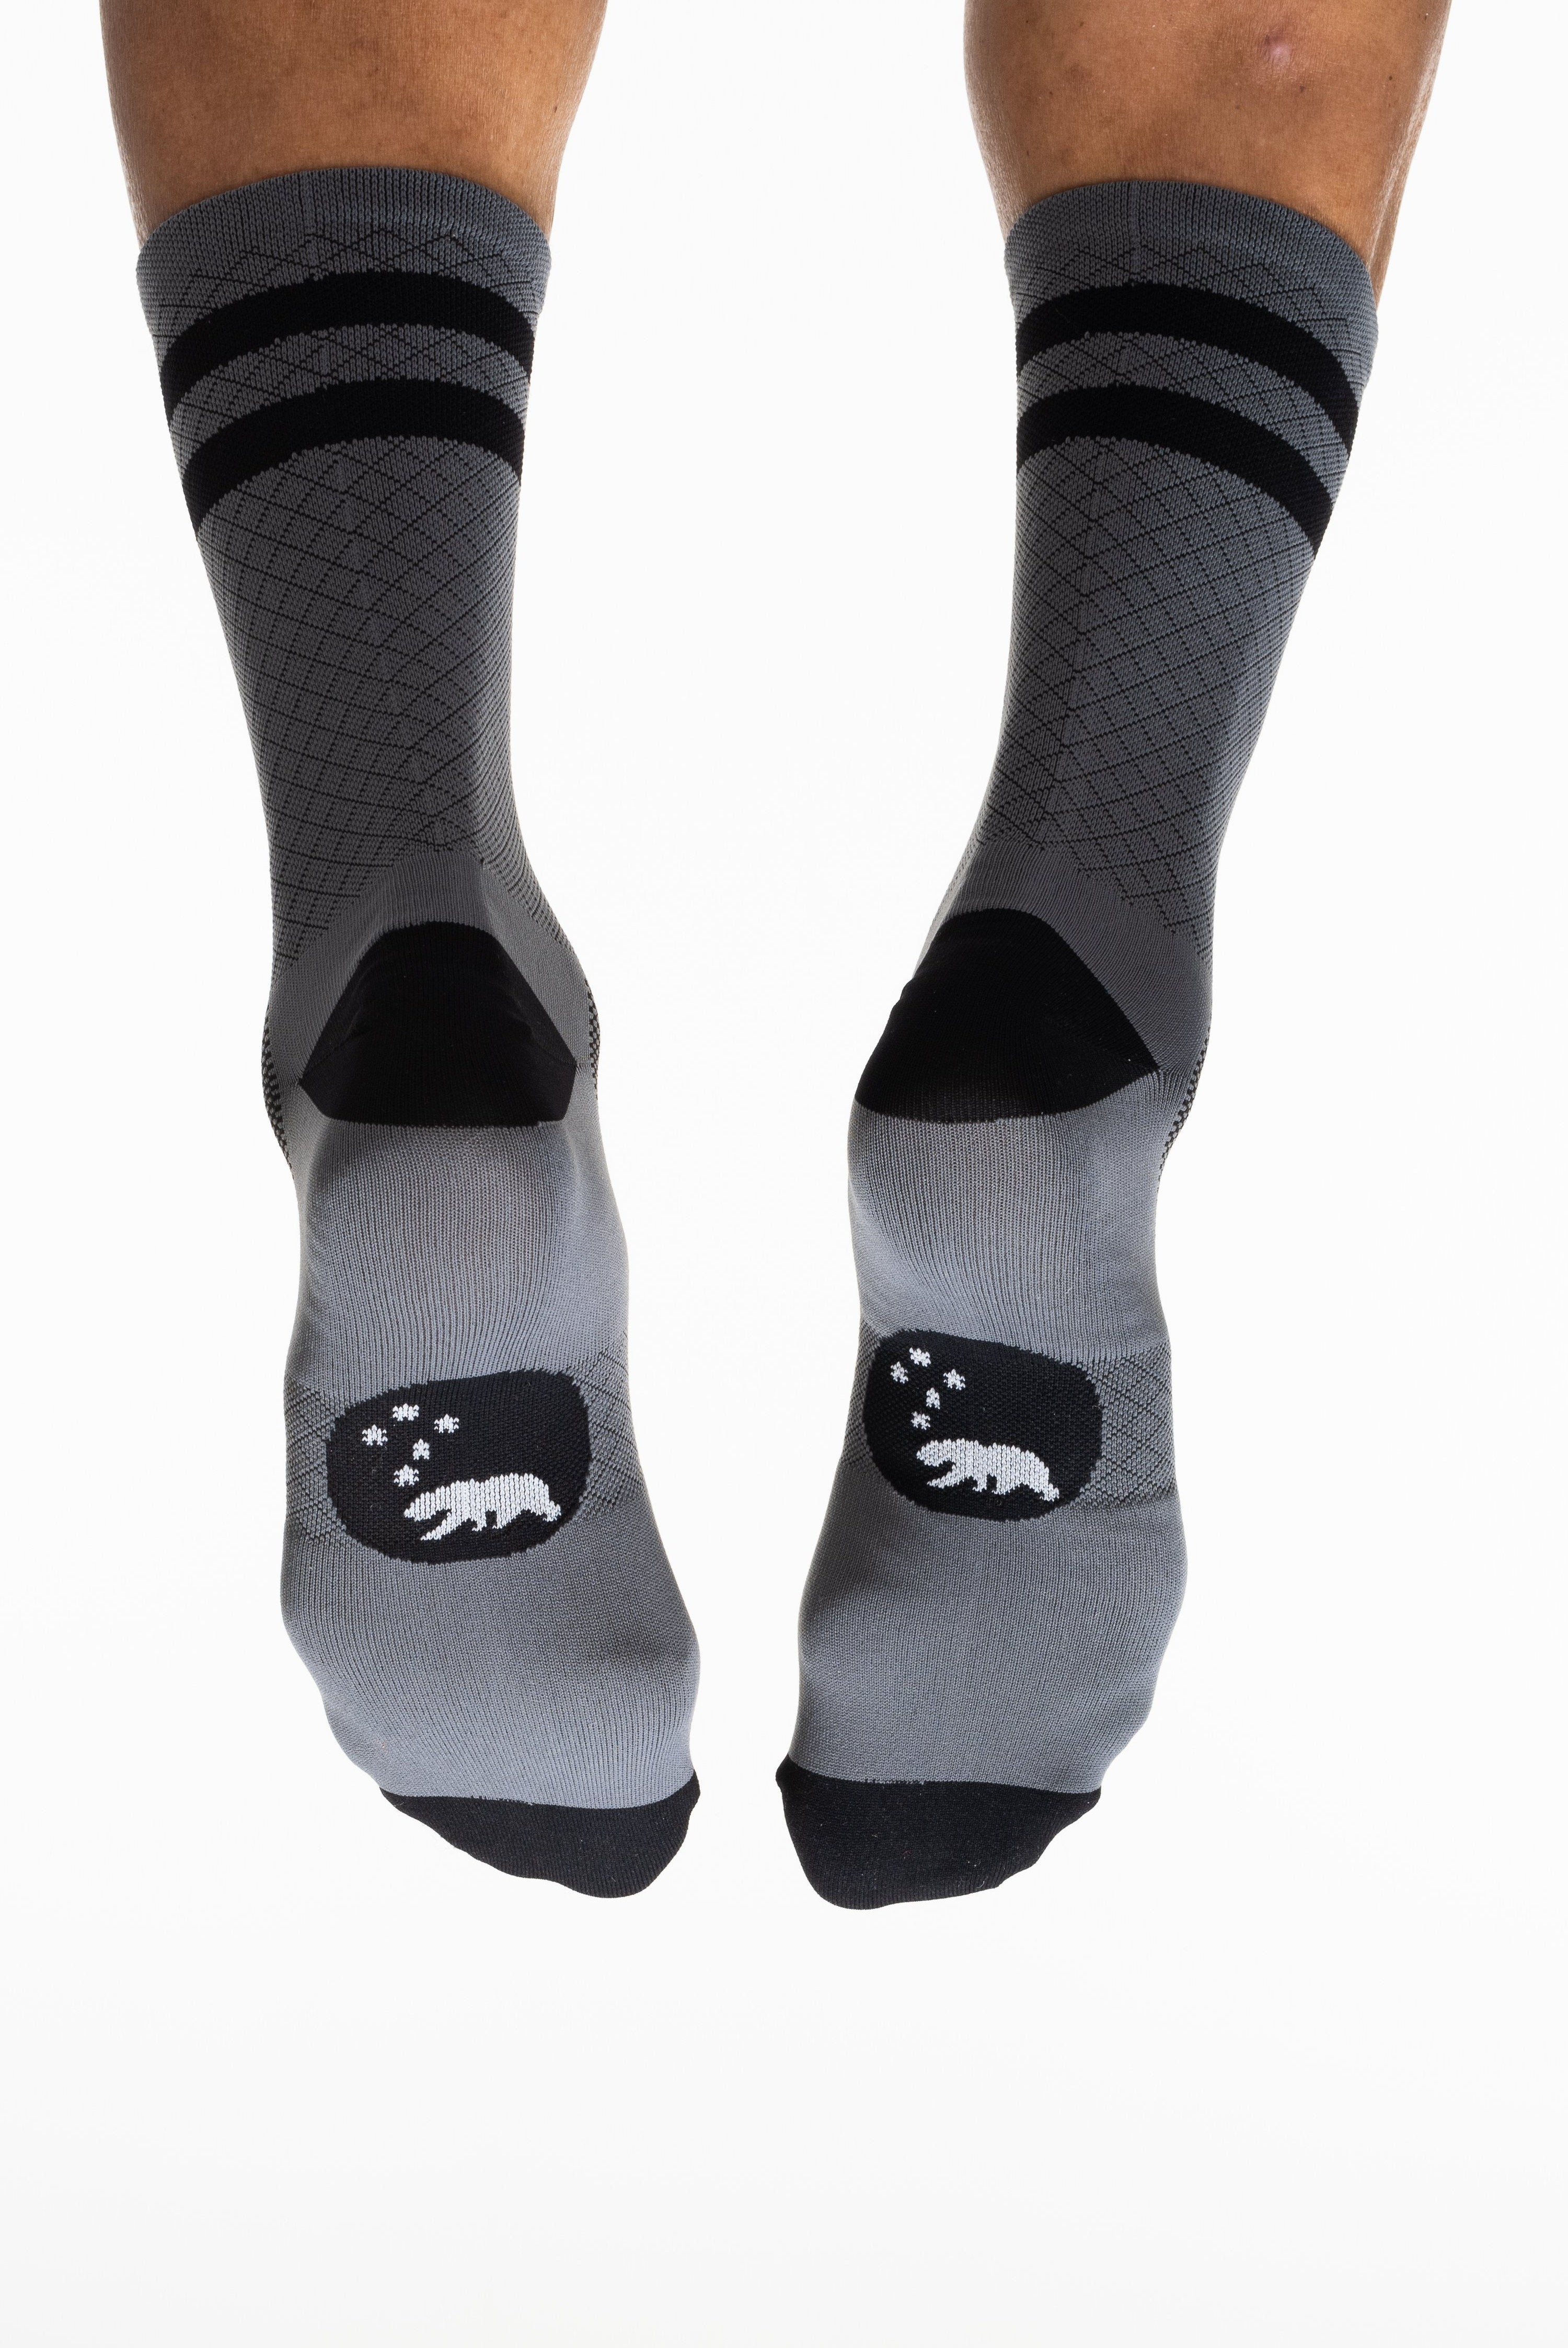 Back and bottom view of WYN Flagship Grey socks. Grey socks with black stripes on calf and bear logo on sole.